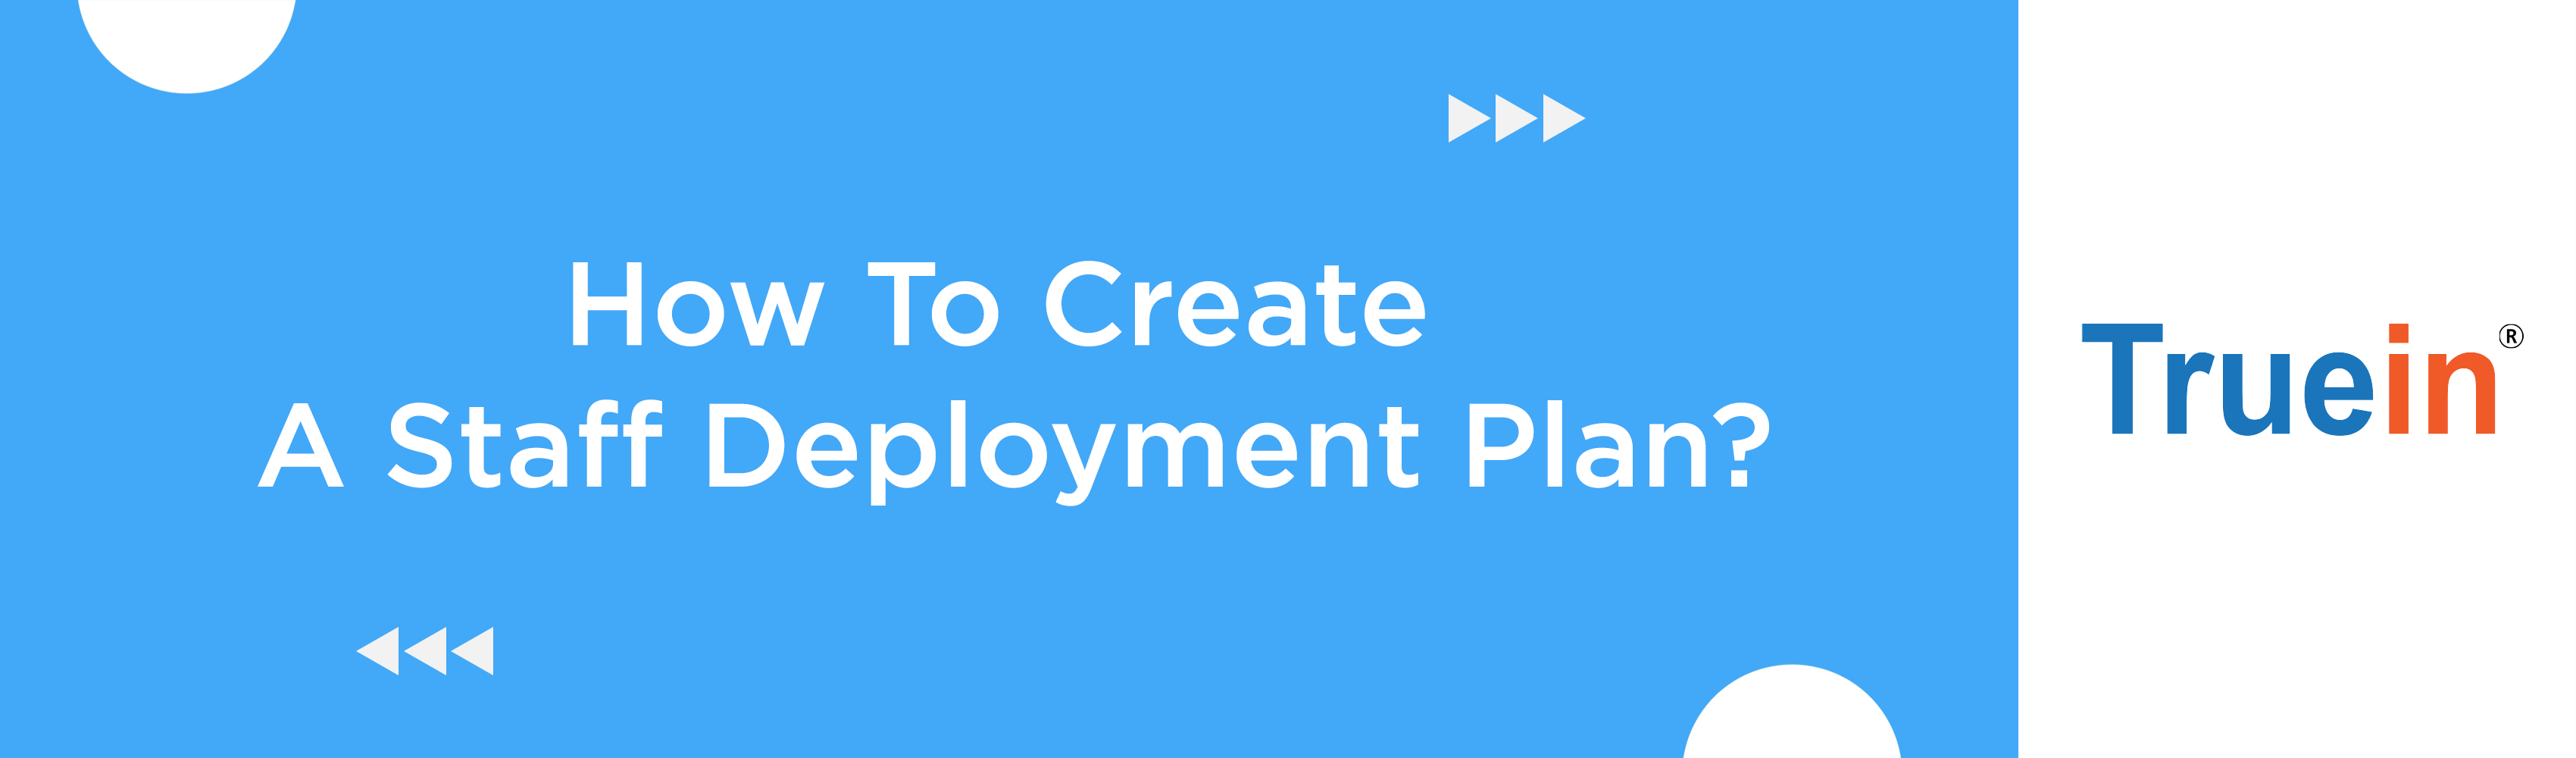 How To Create A Staff Deployment Plan?